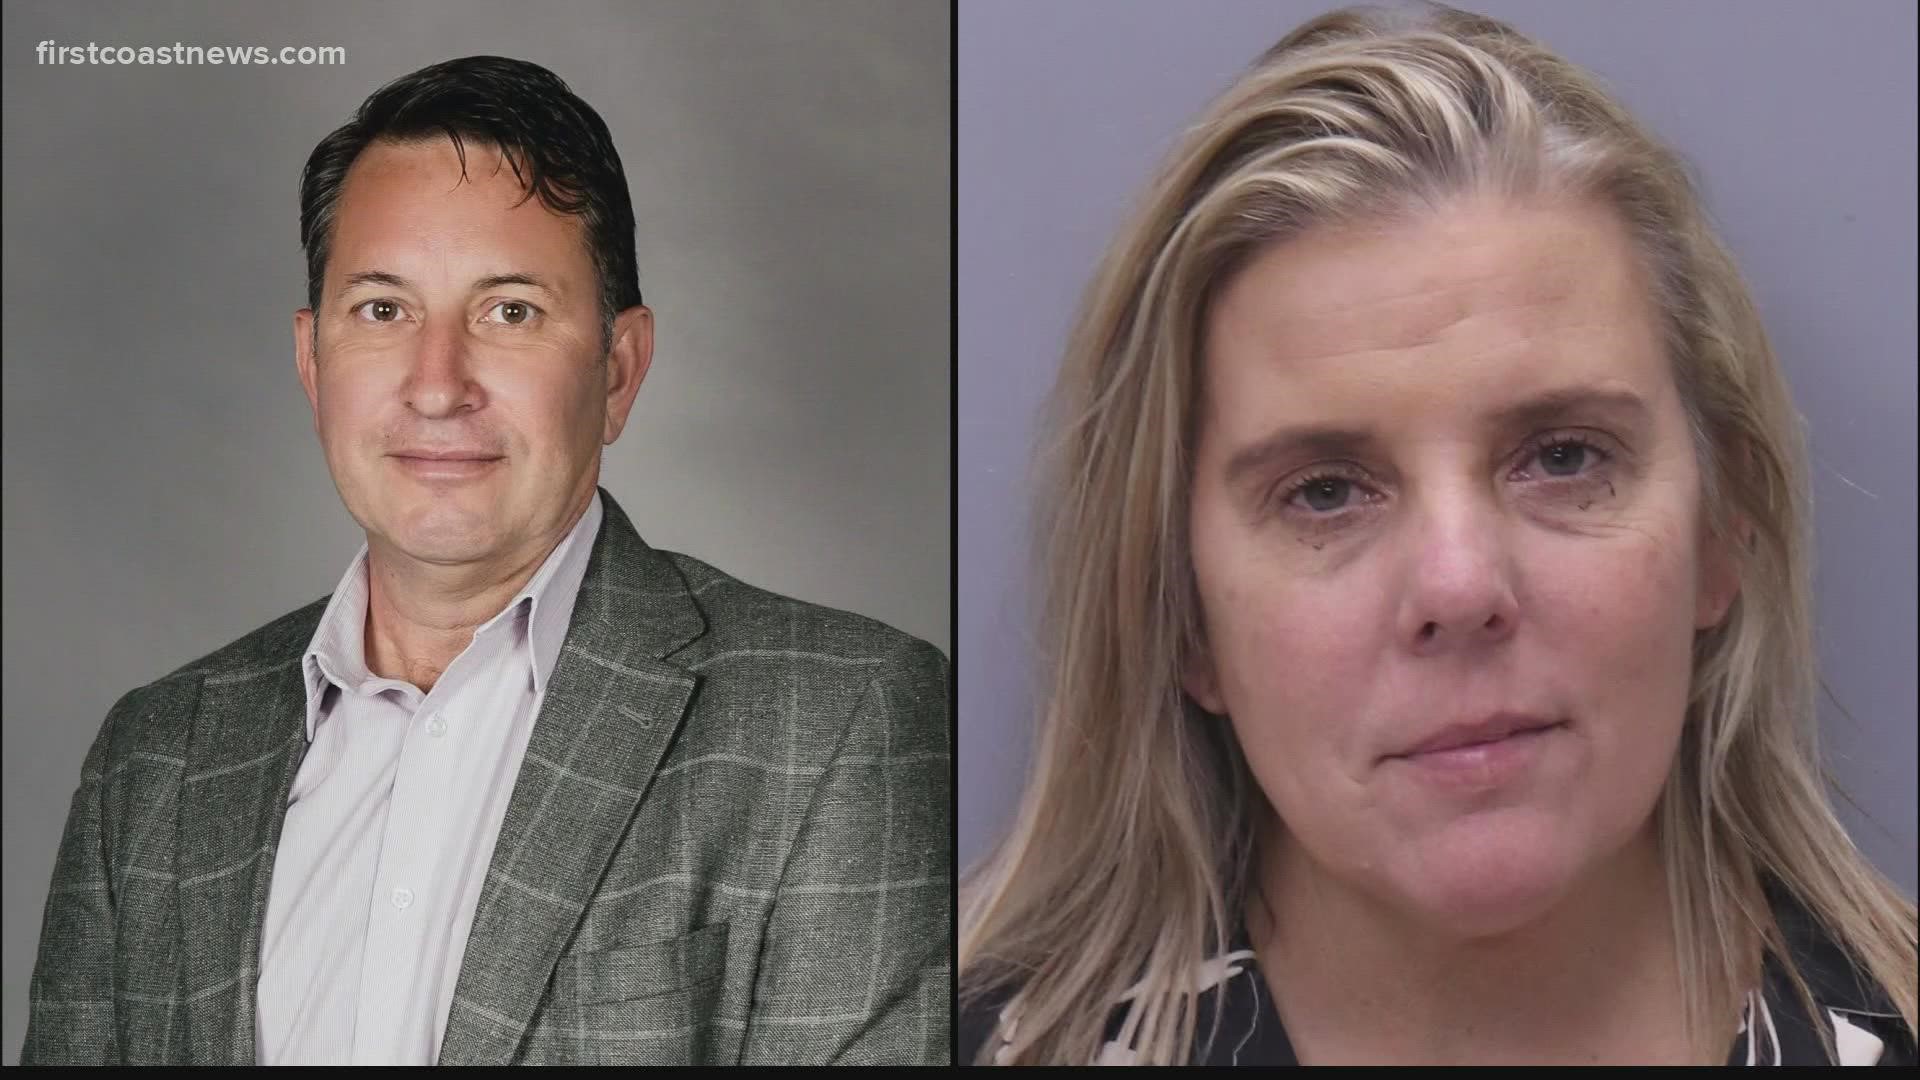 The report alleges that St. Augustine Beach Commissioner Ernesto Torres became angry when he learned his wife was being charged with D.U.I.